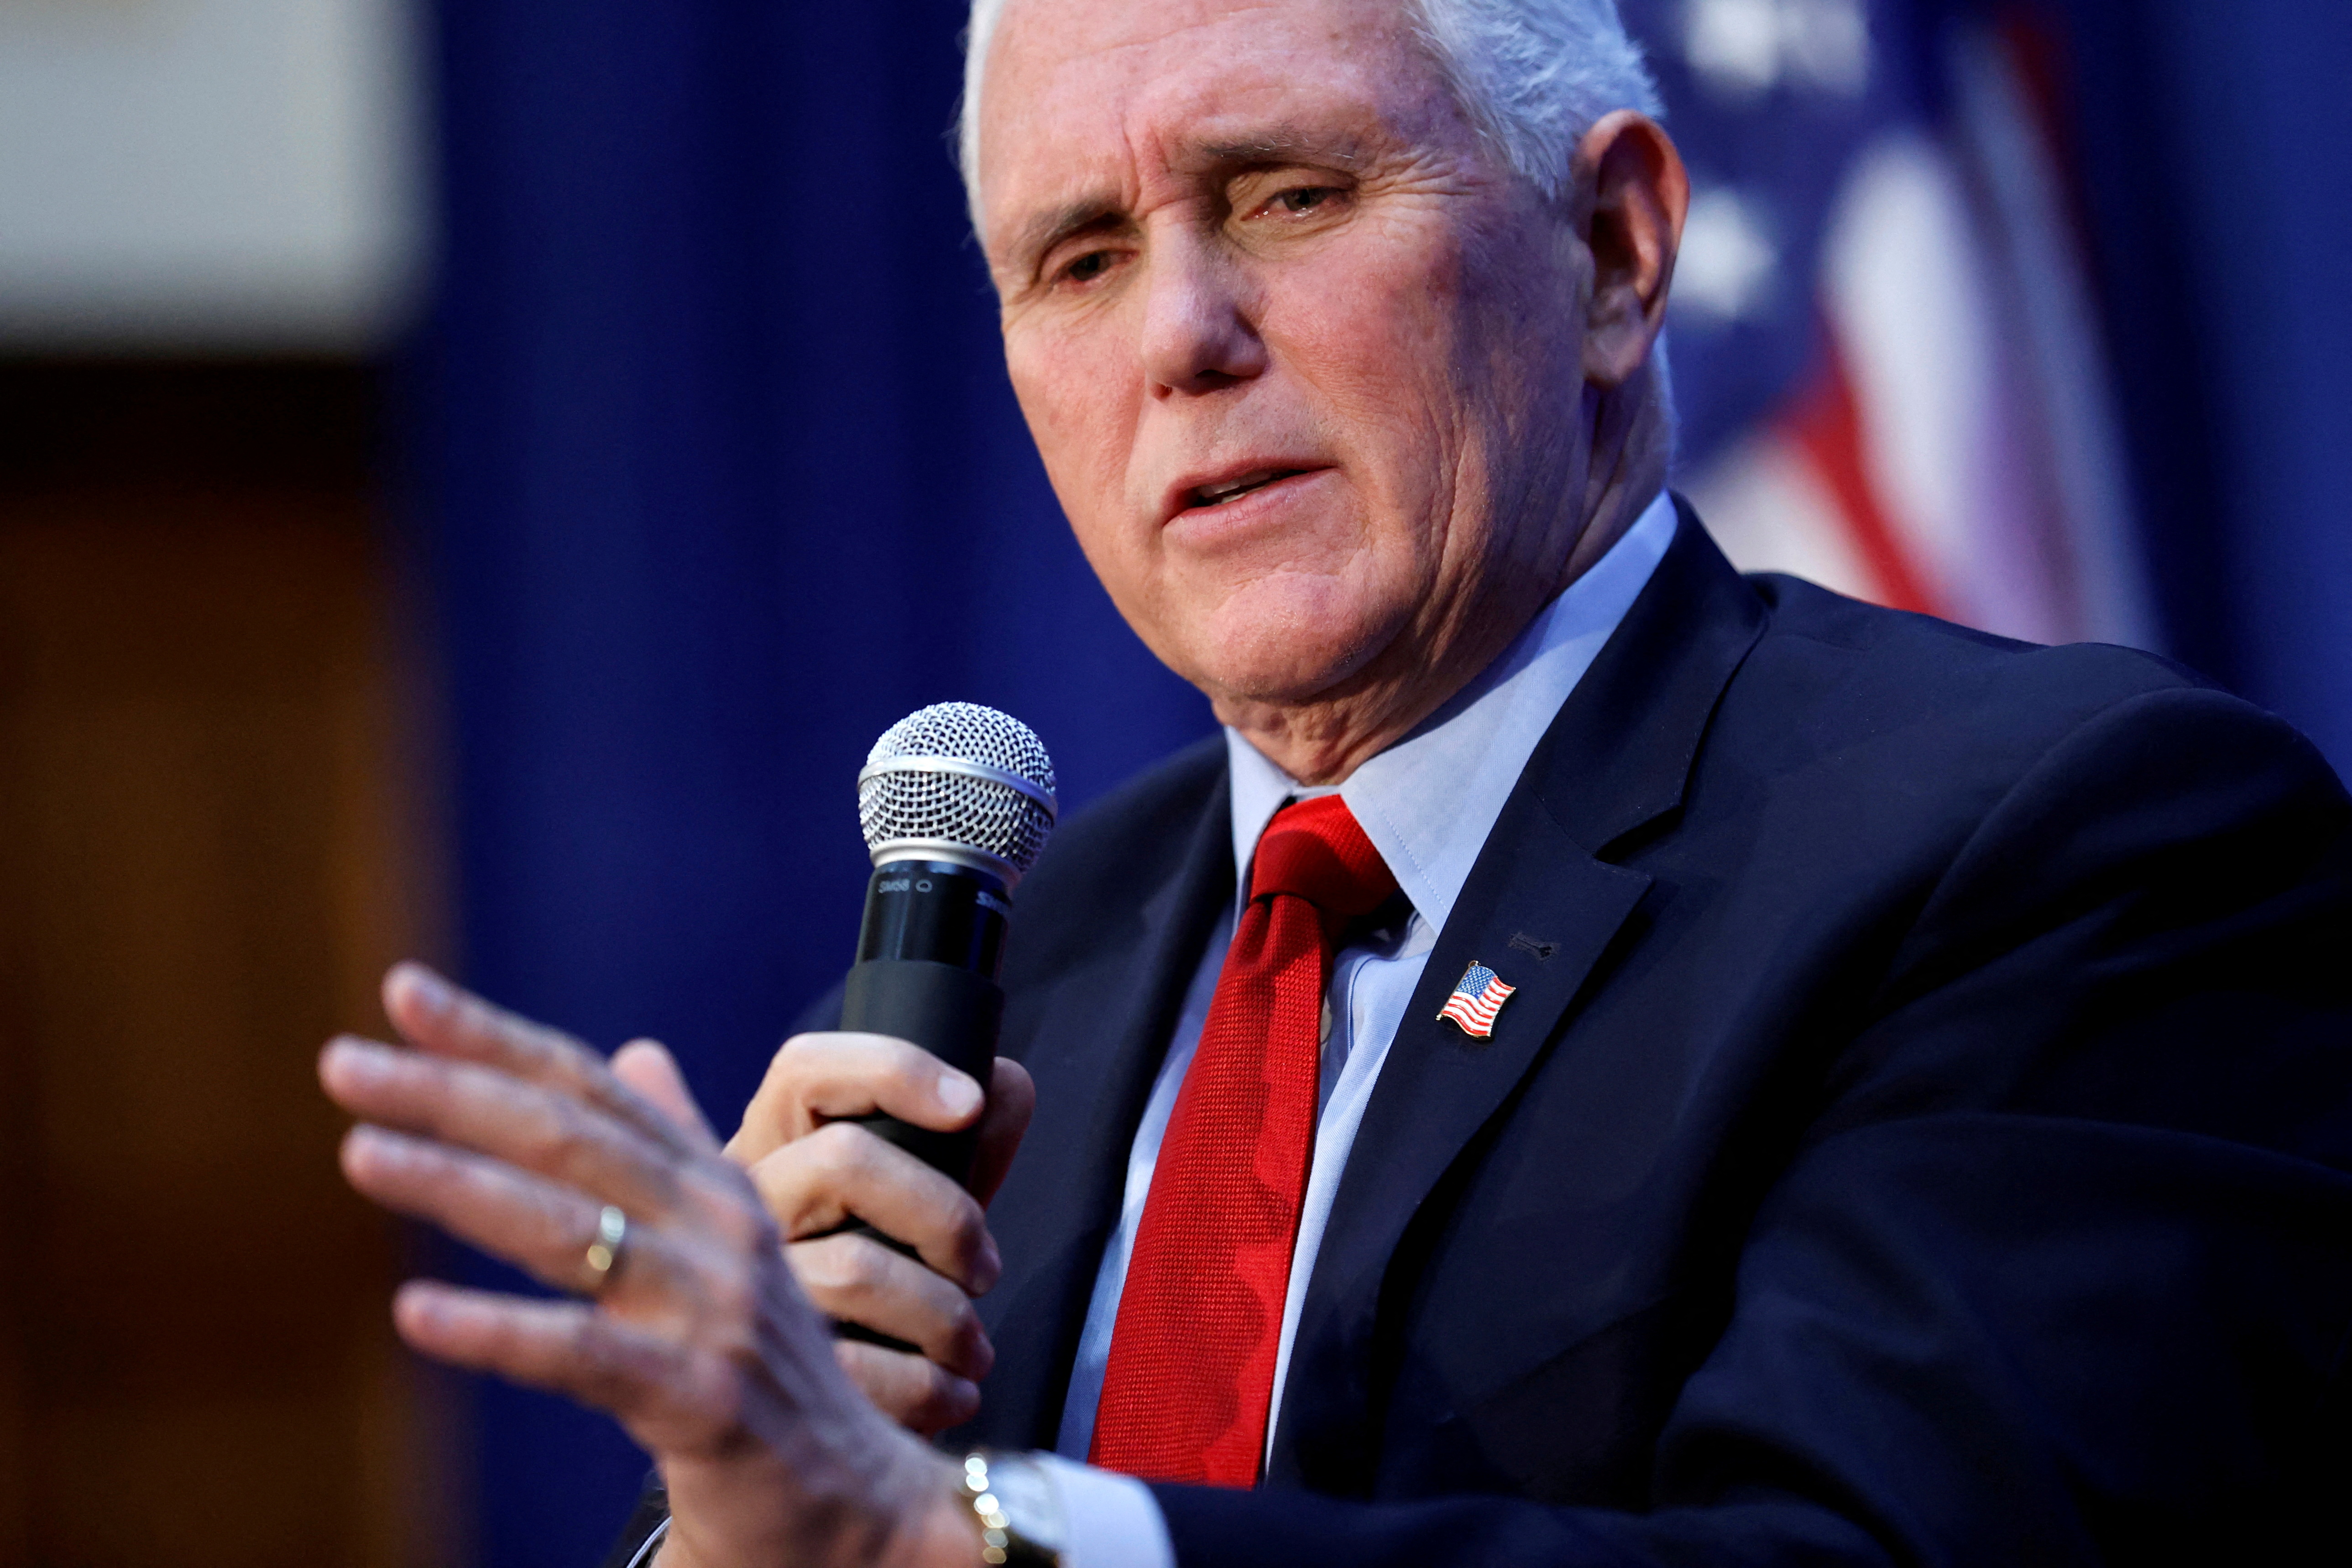 U.S. former Vice President Pence delivers remarks on abortion in Washington